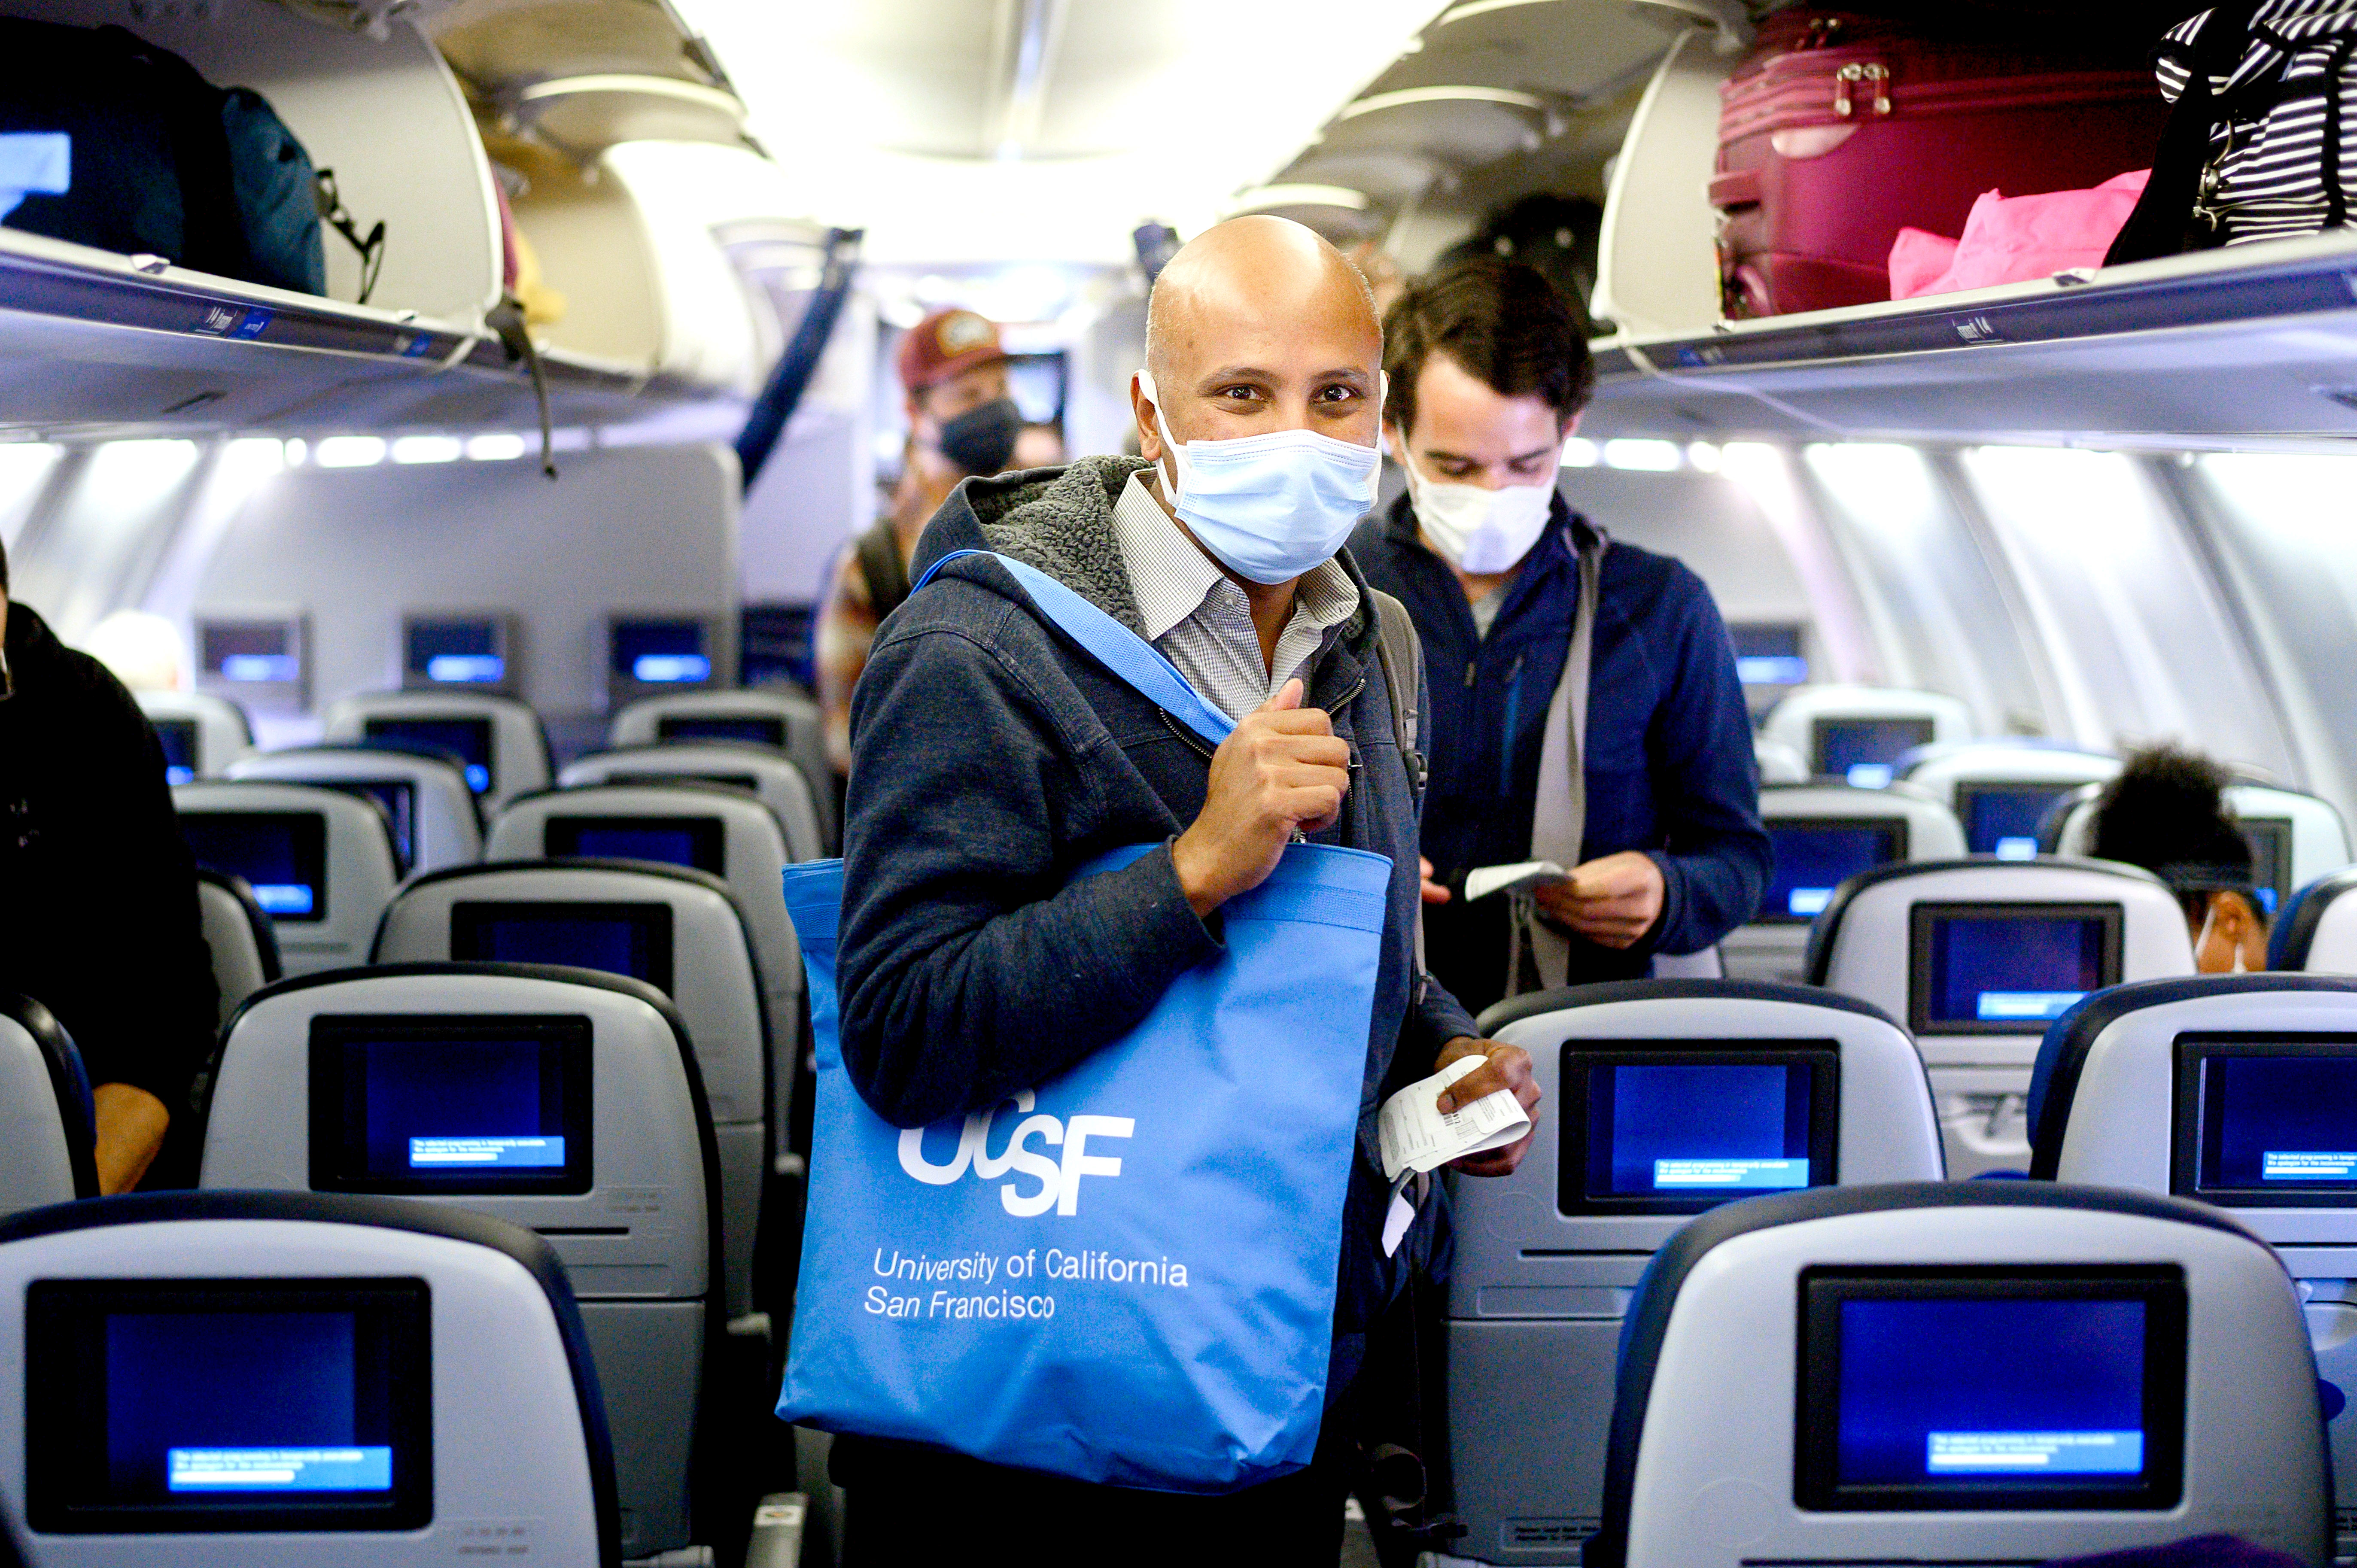 Man on a plane with a face mask and UCSF tote bag